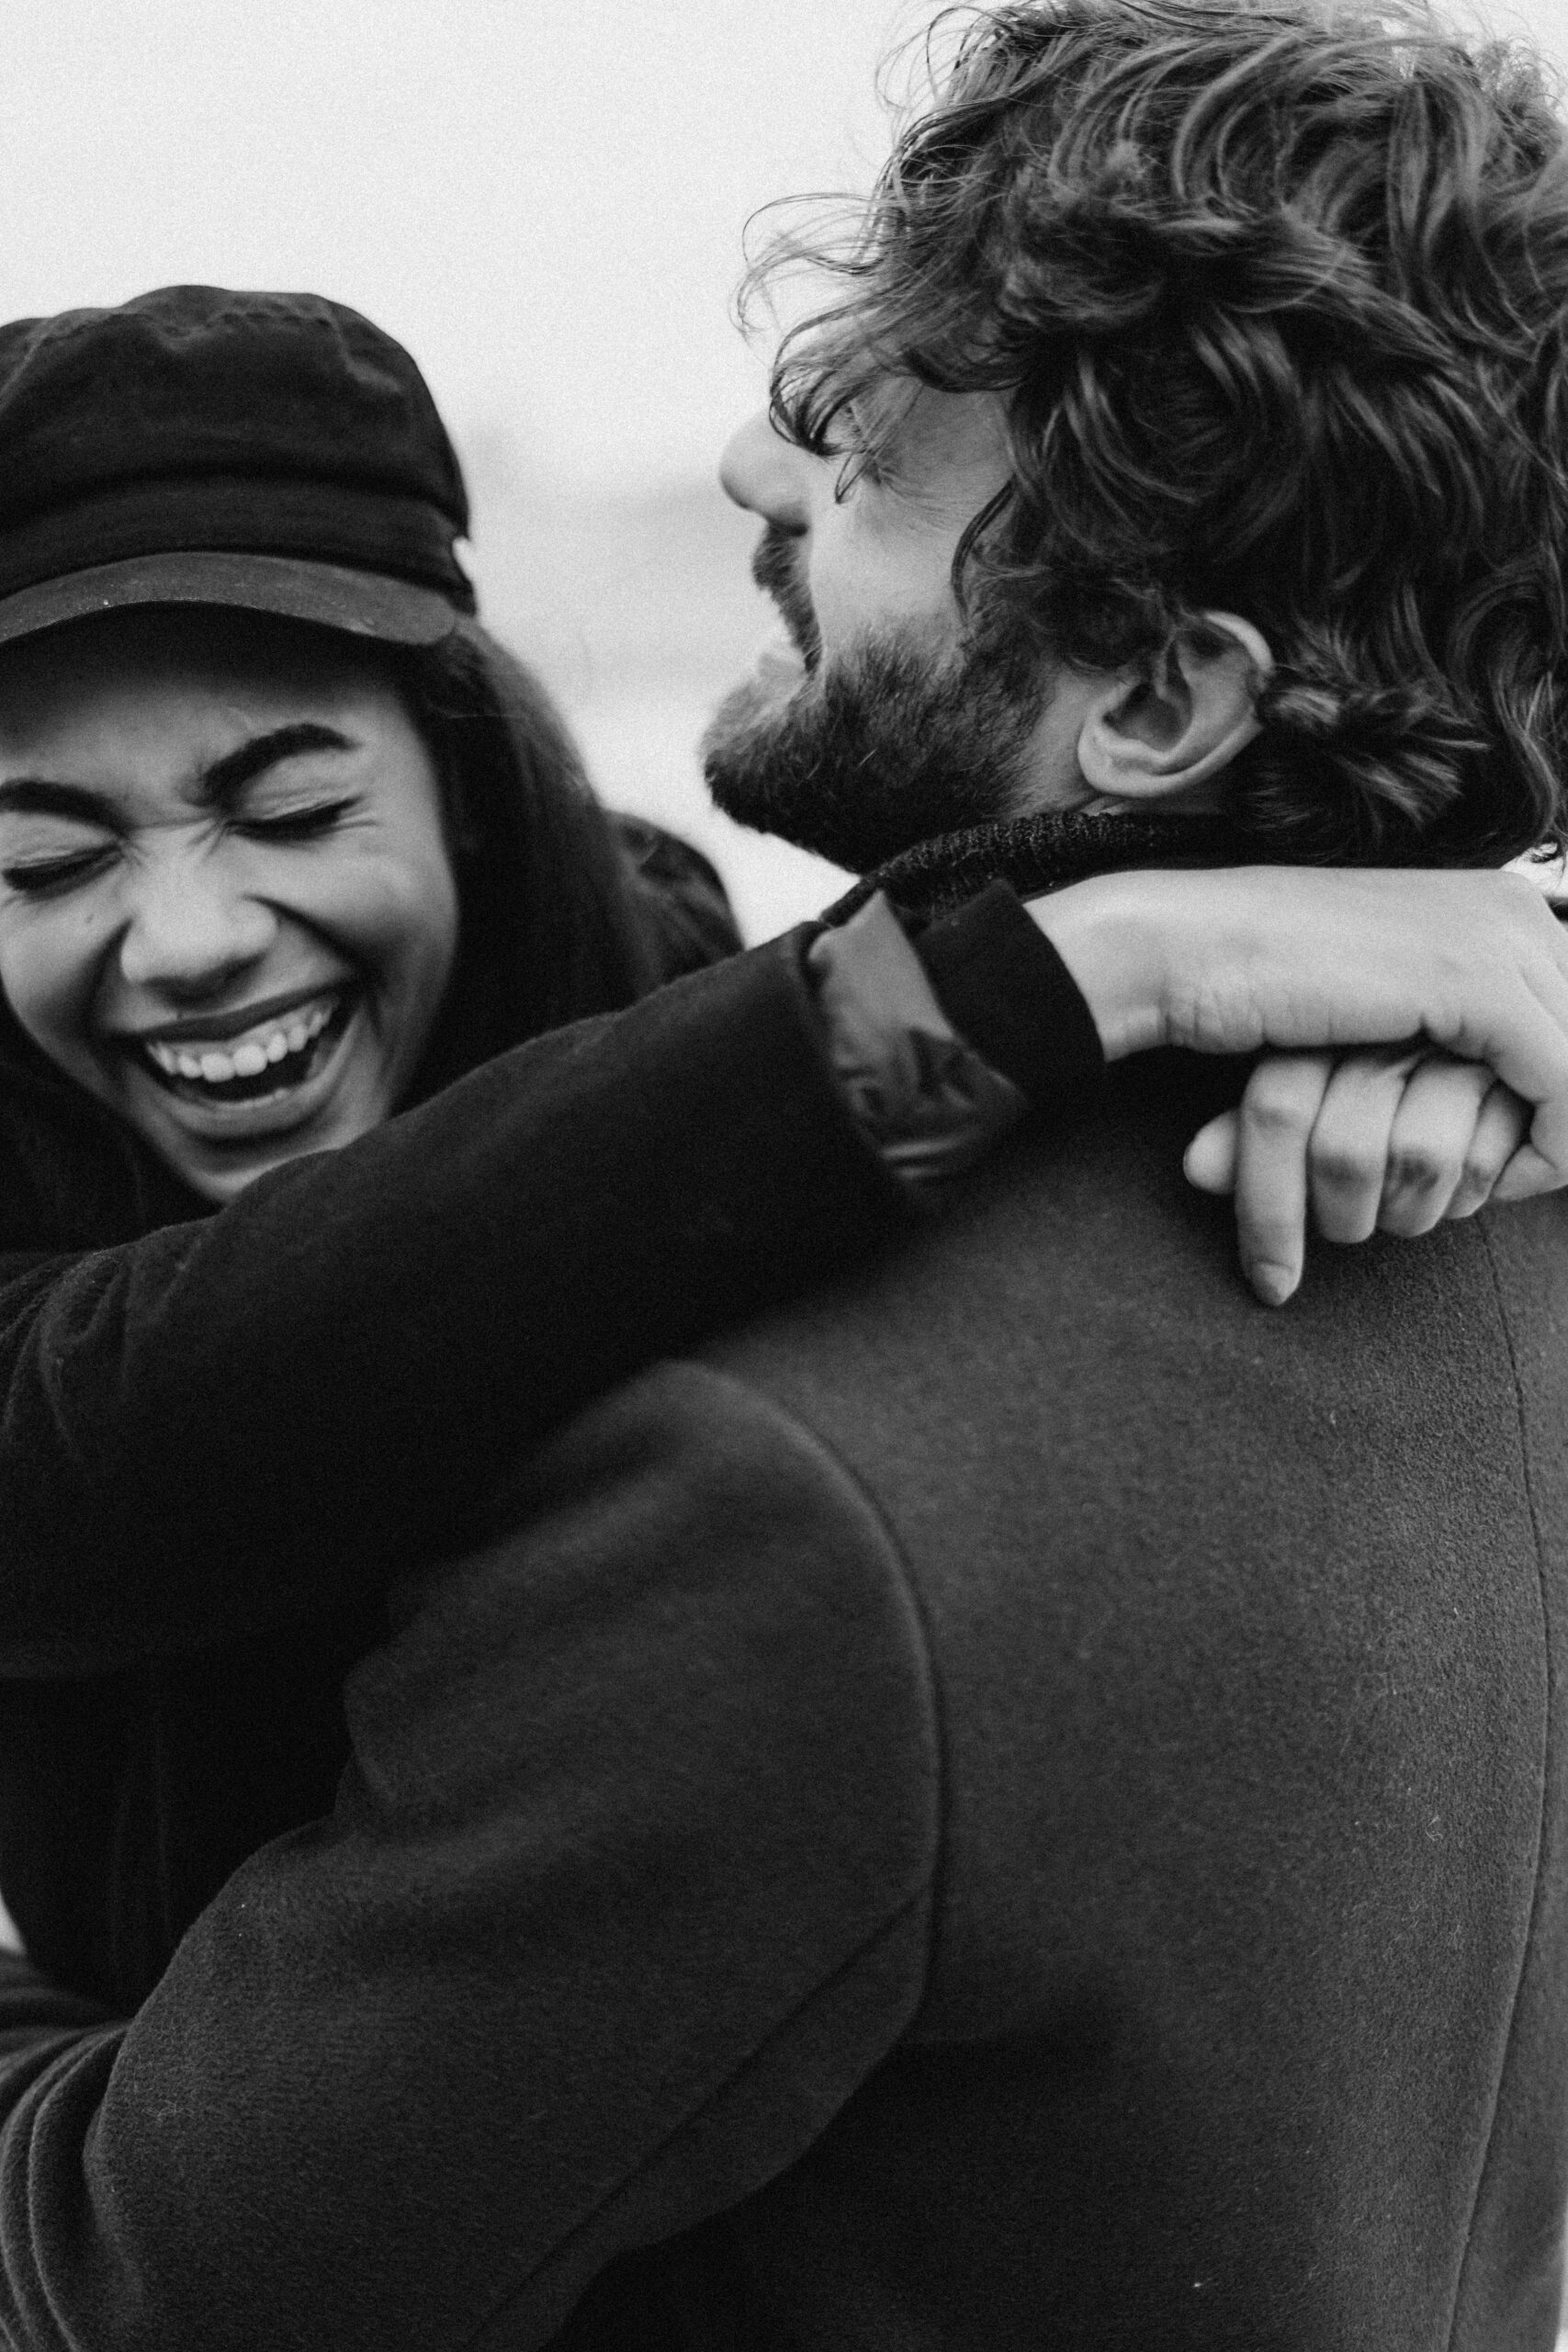 Black and white image of a couple with their arms around each other, laughing.